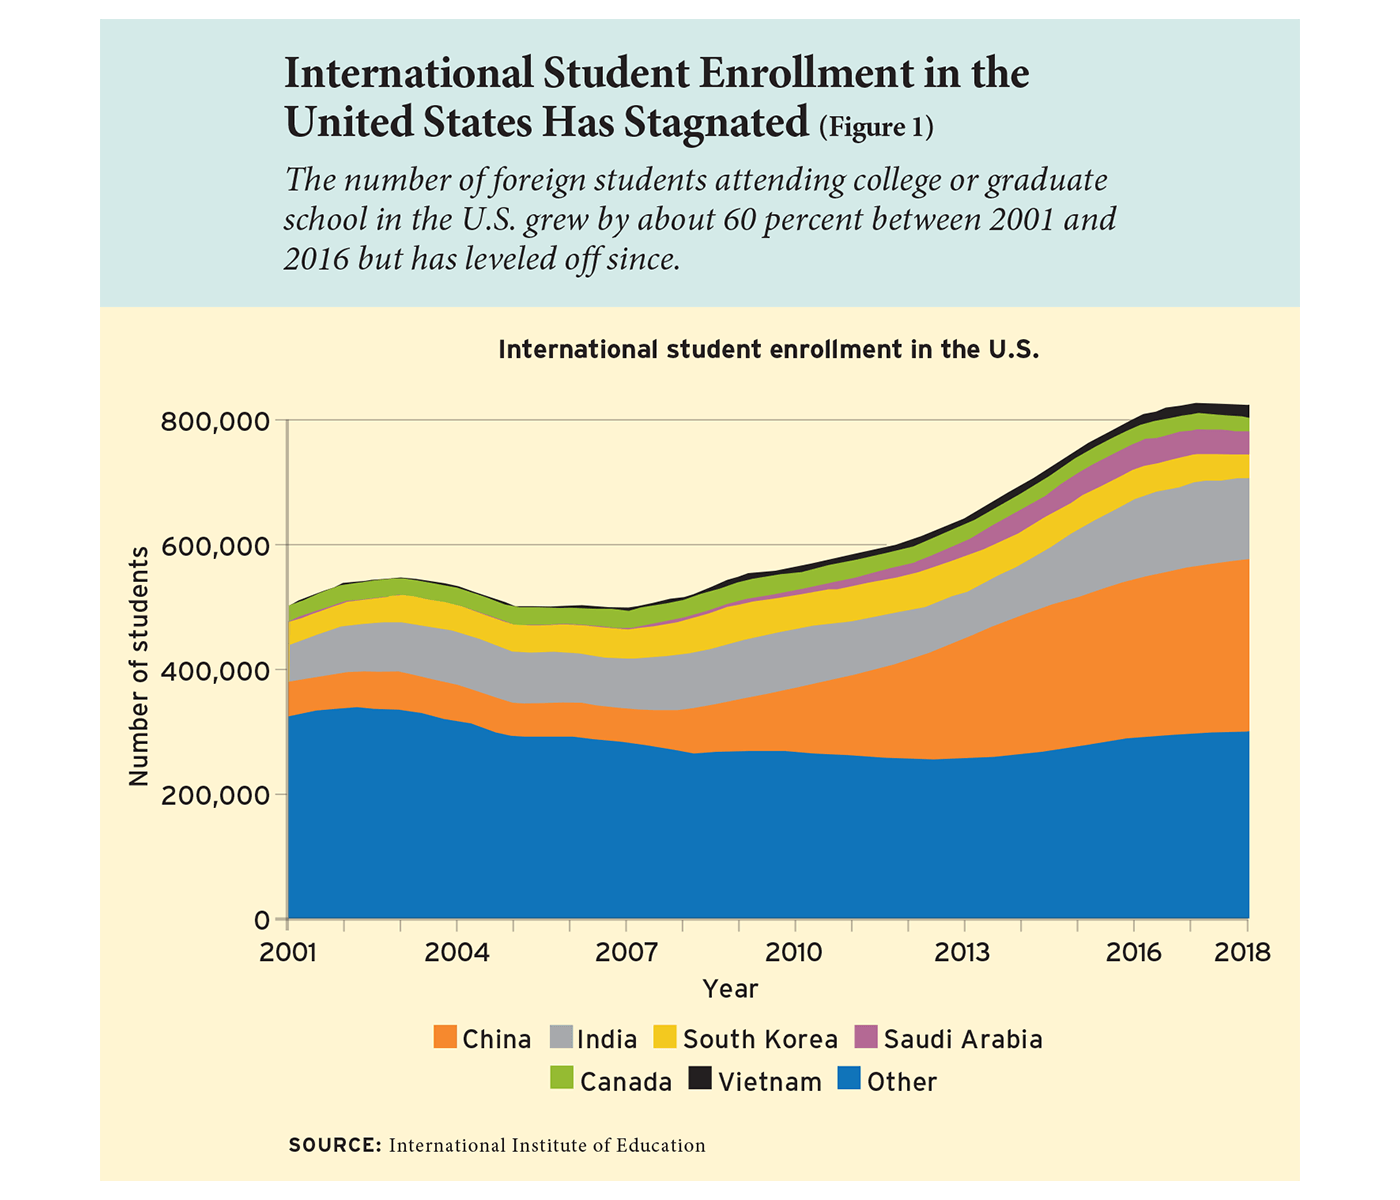 International Student Enrollment in the United States Has Stagnated (Figure 1)